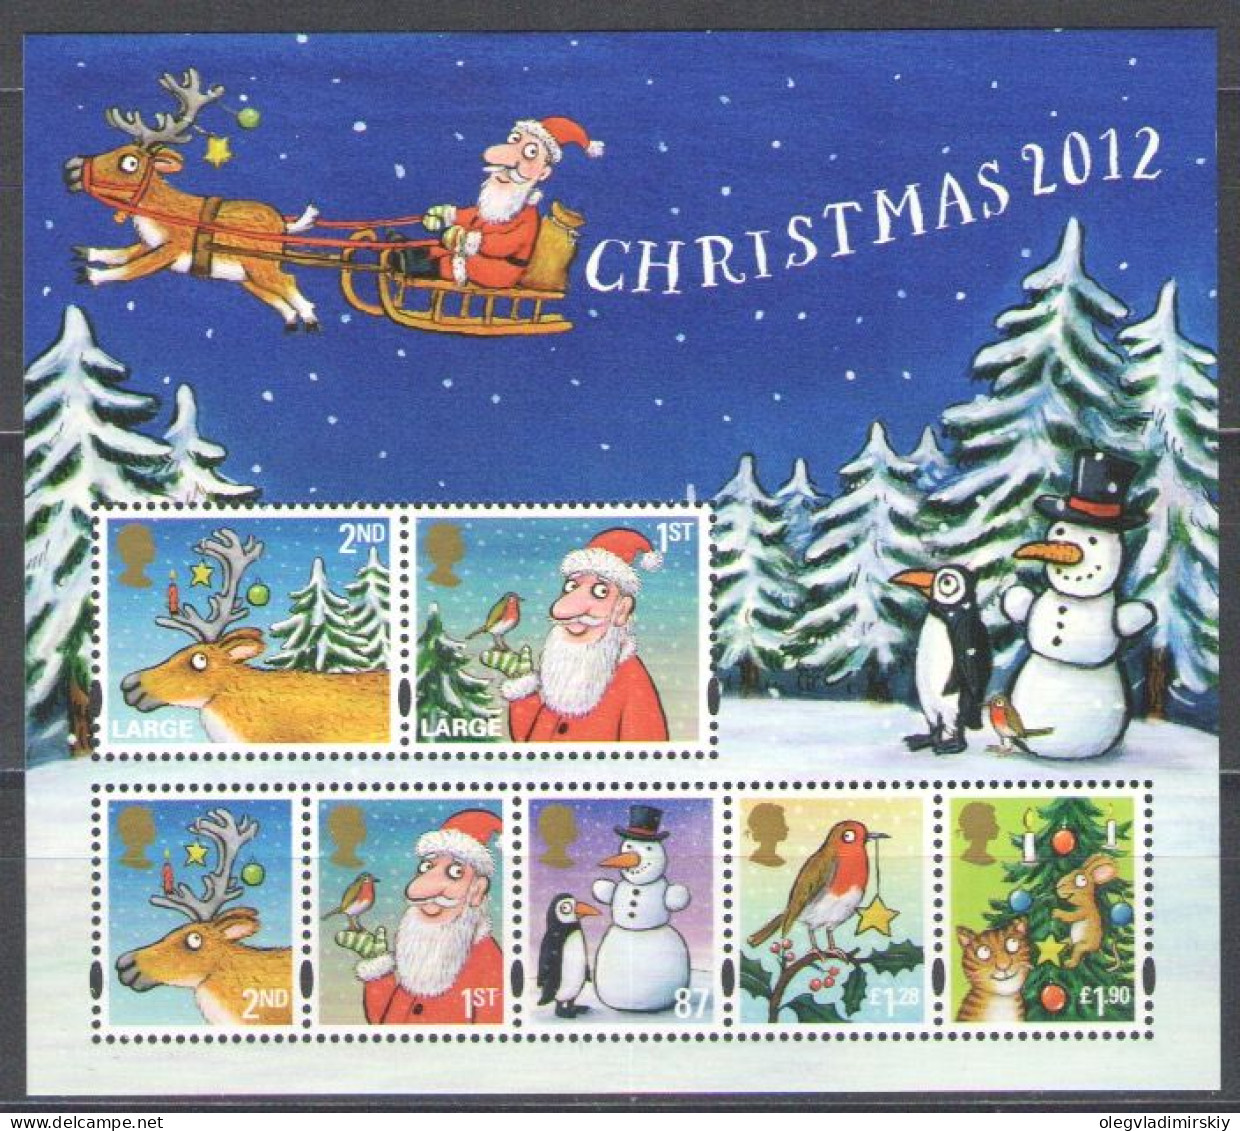 Great Britain United Kingdom 2012 Christmas Set Of 7 Classic Stamps In Block MNH - Navidad